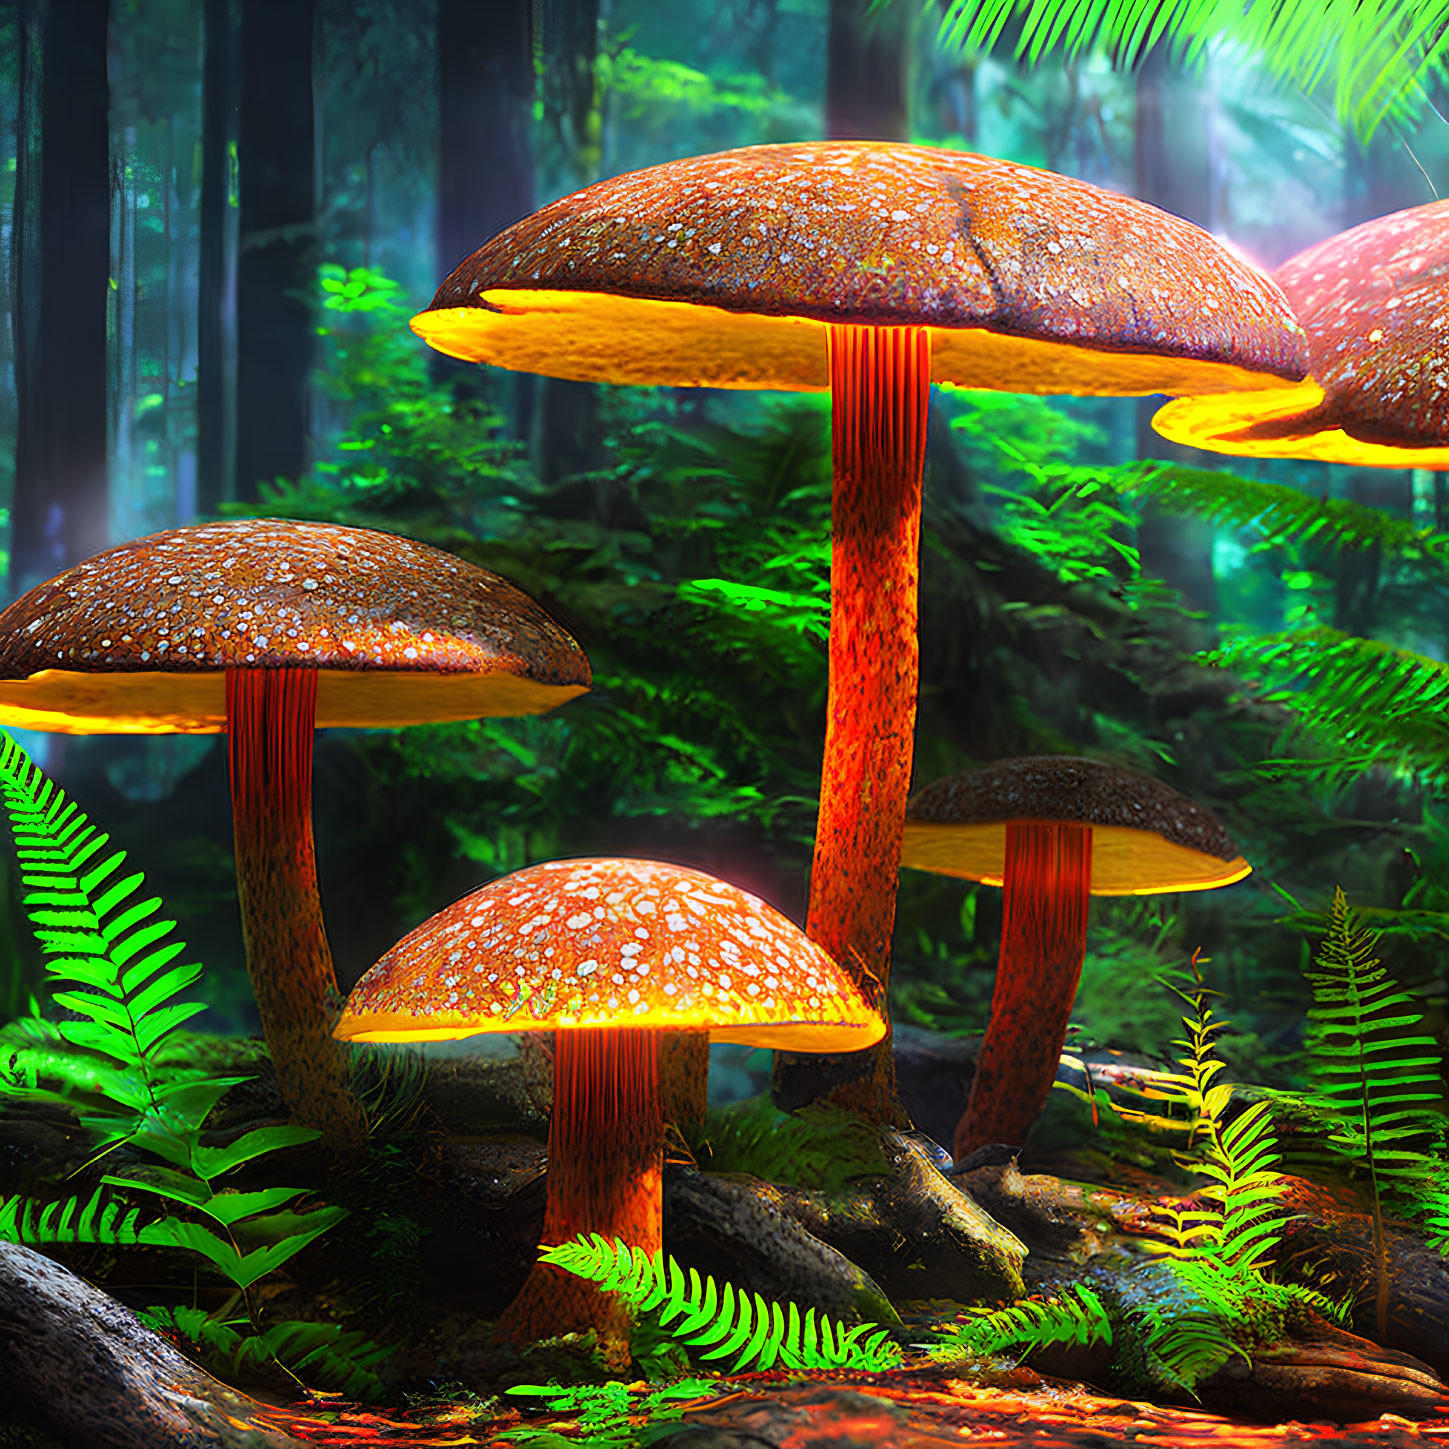 Oversized speckled mushrooms in mystical forest with sunlight beams